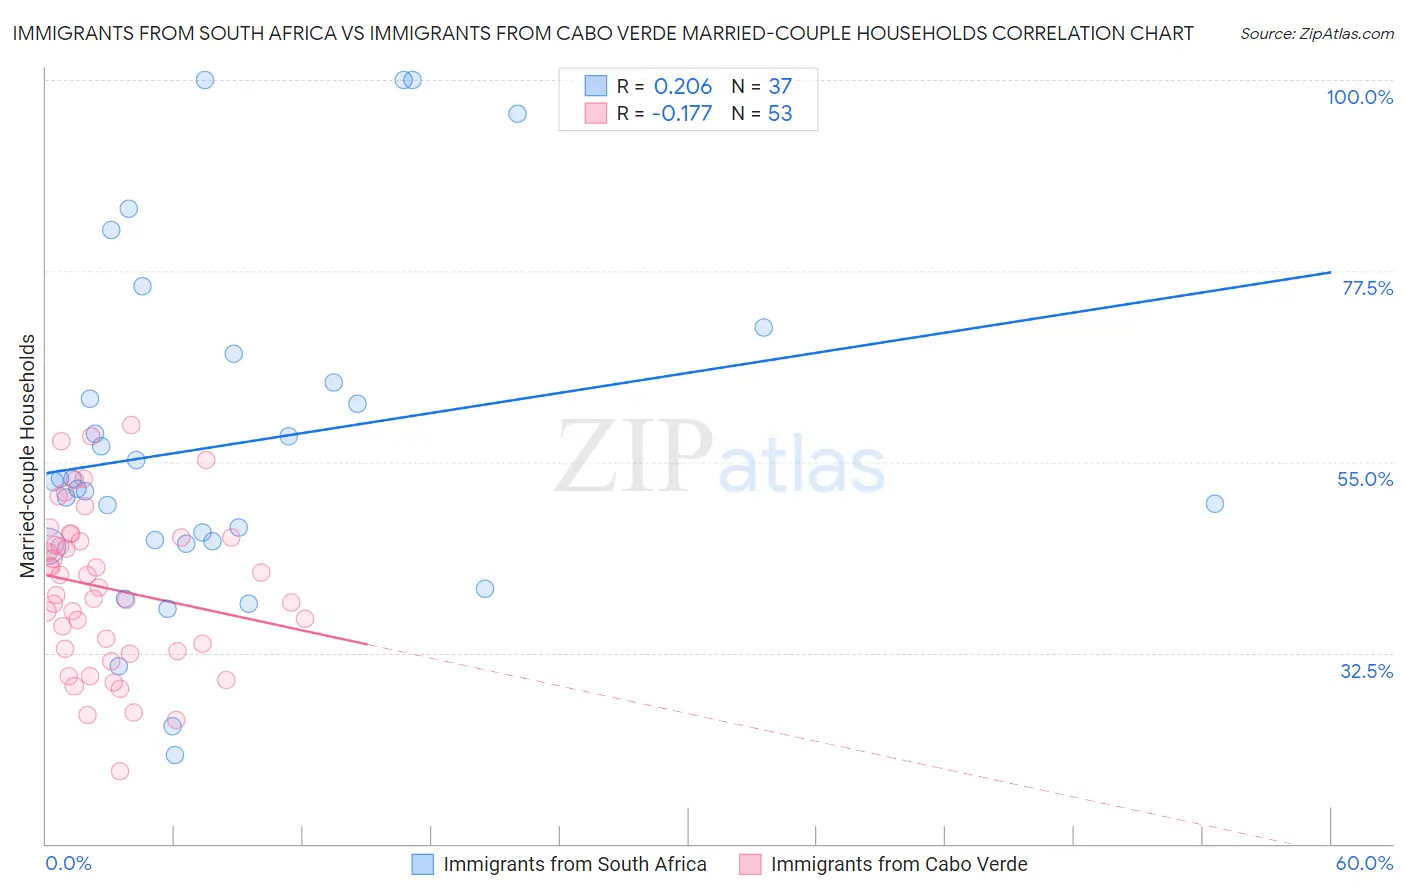 Immigrants from South Africa vs Immigrants from Cabo Verde Married-couple Households